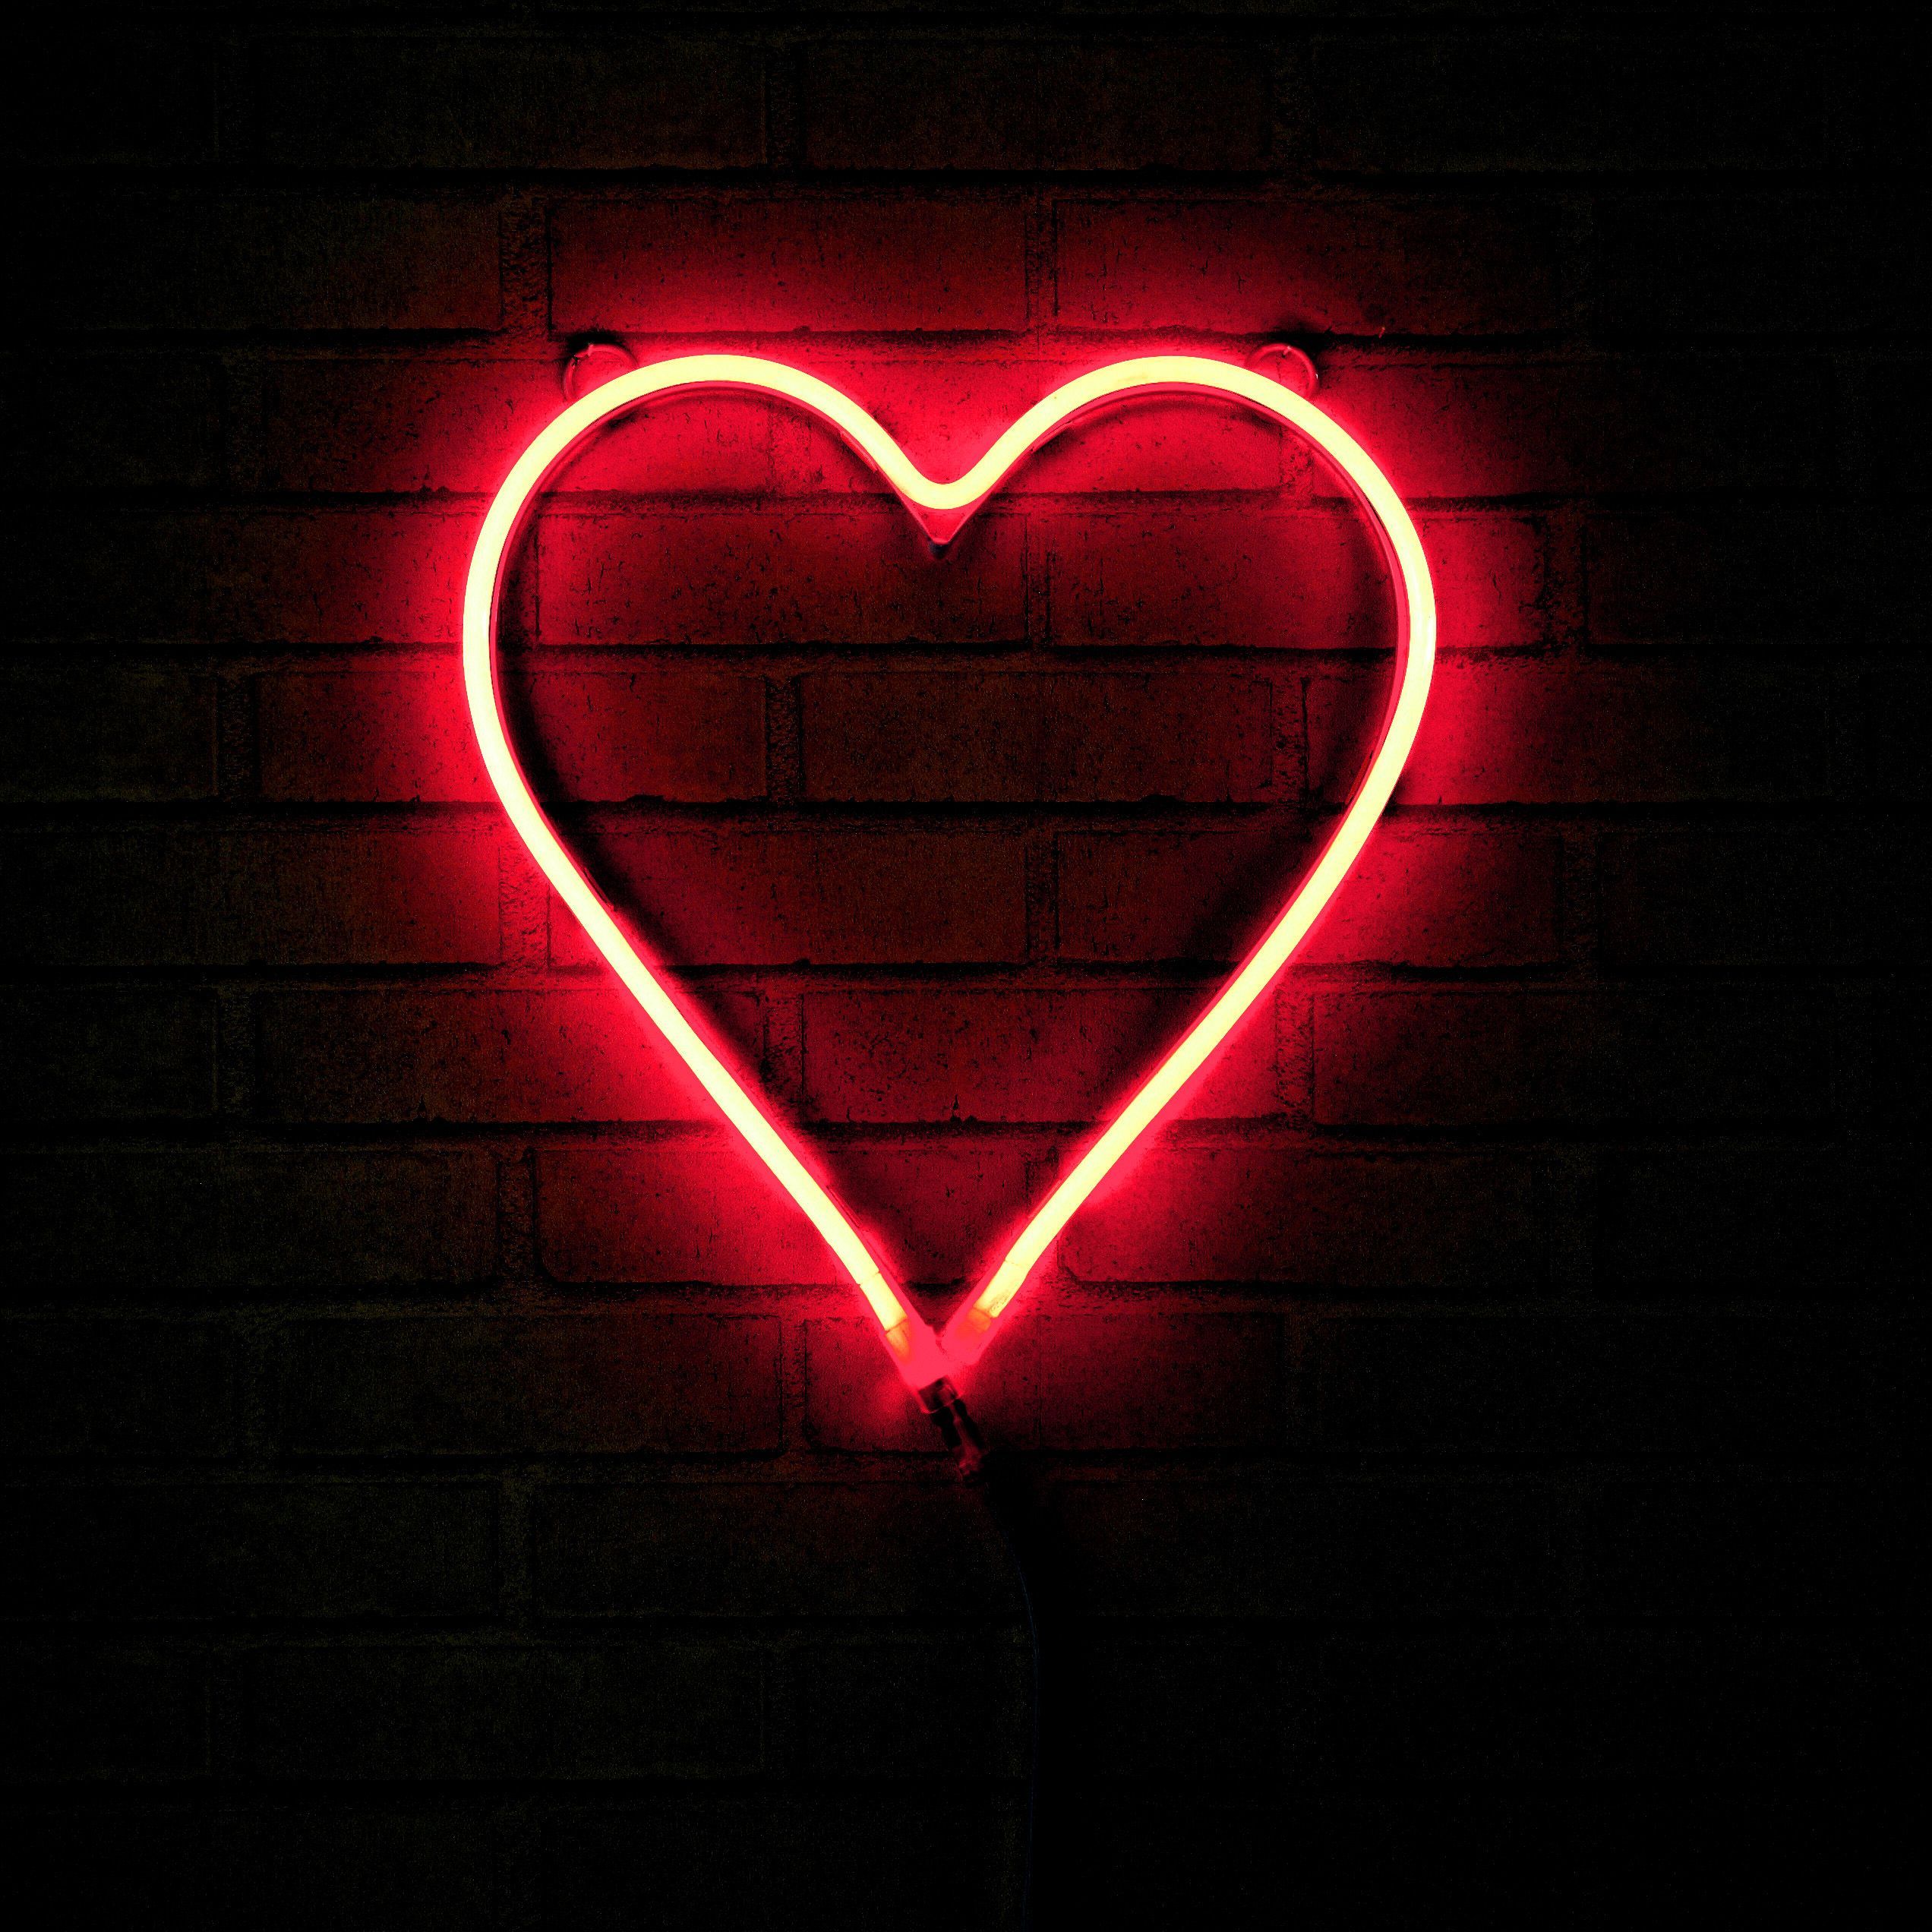 Retro Red Heart Aesthetic Neon Wallpapers - Wallpaper Cave Source: wallpape...